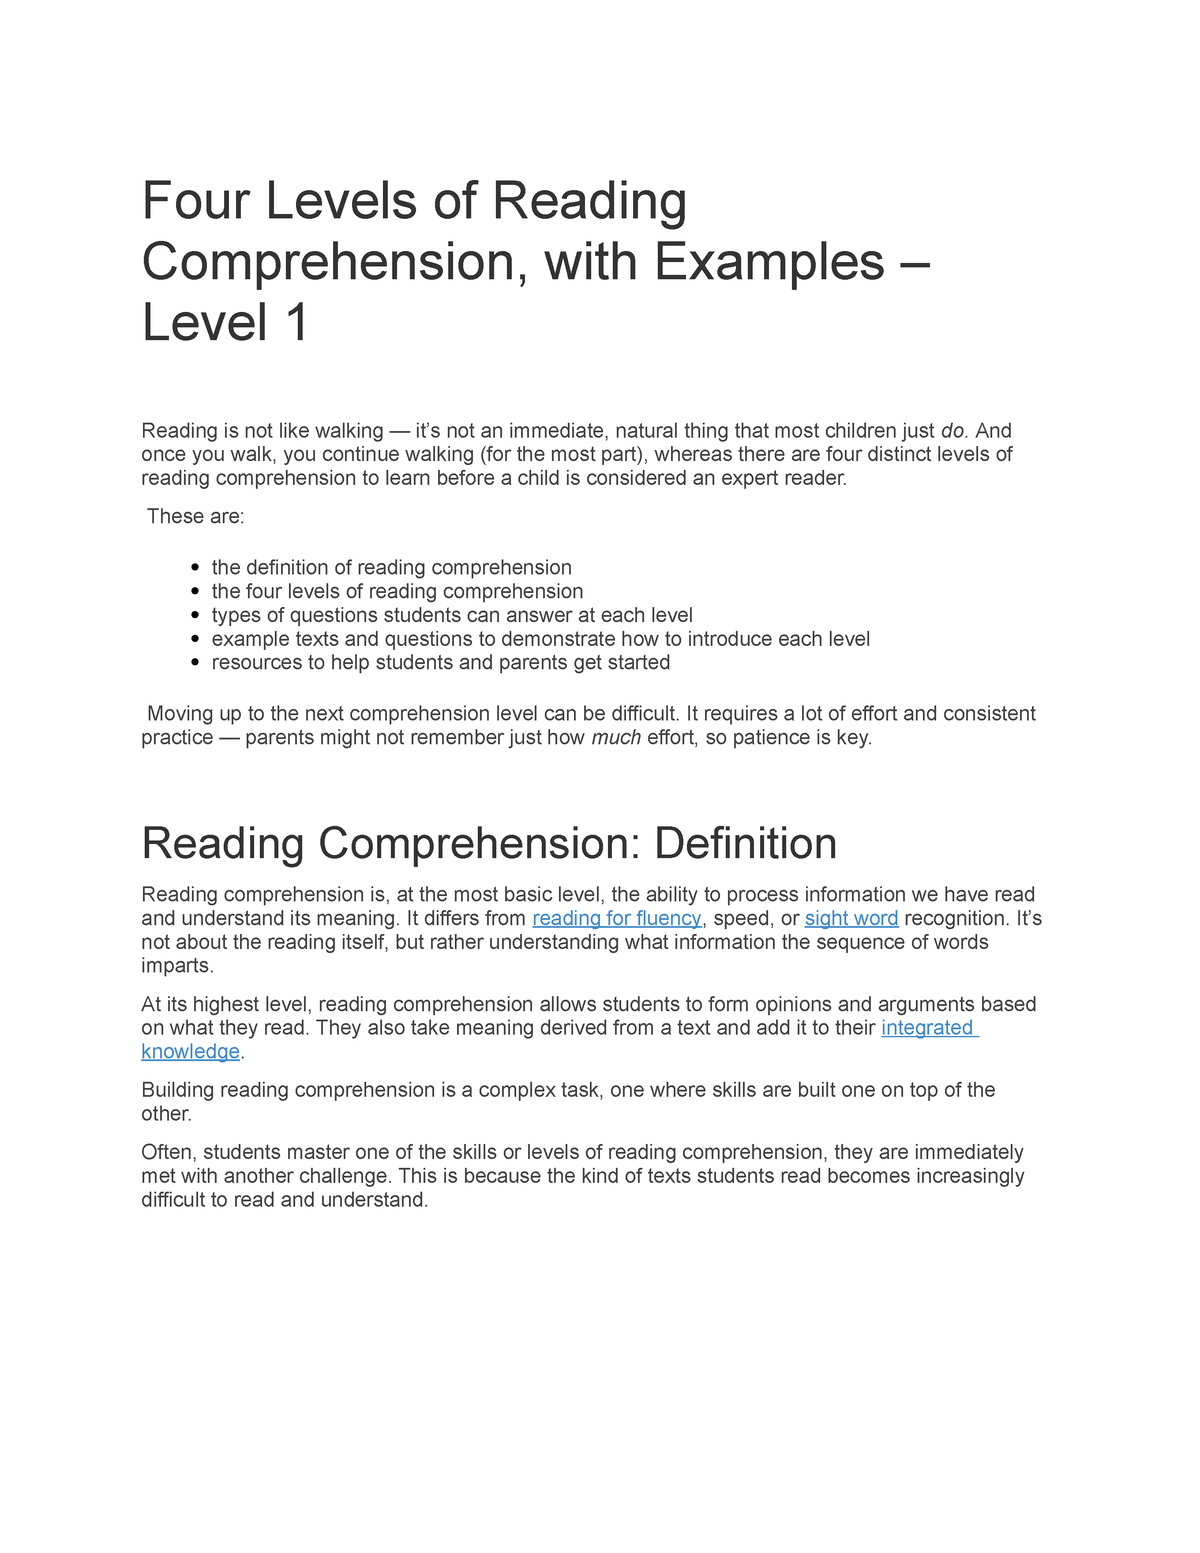 research about reading comprehension level